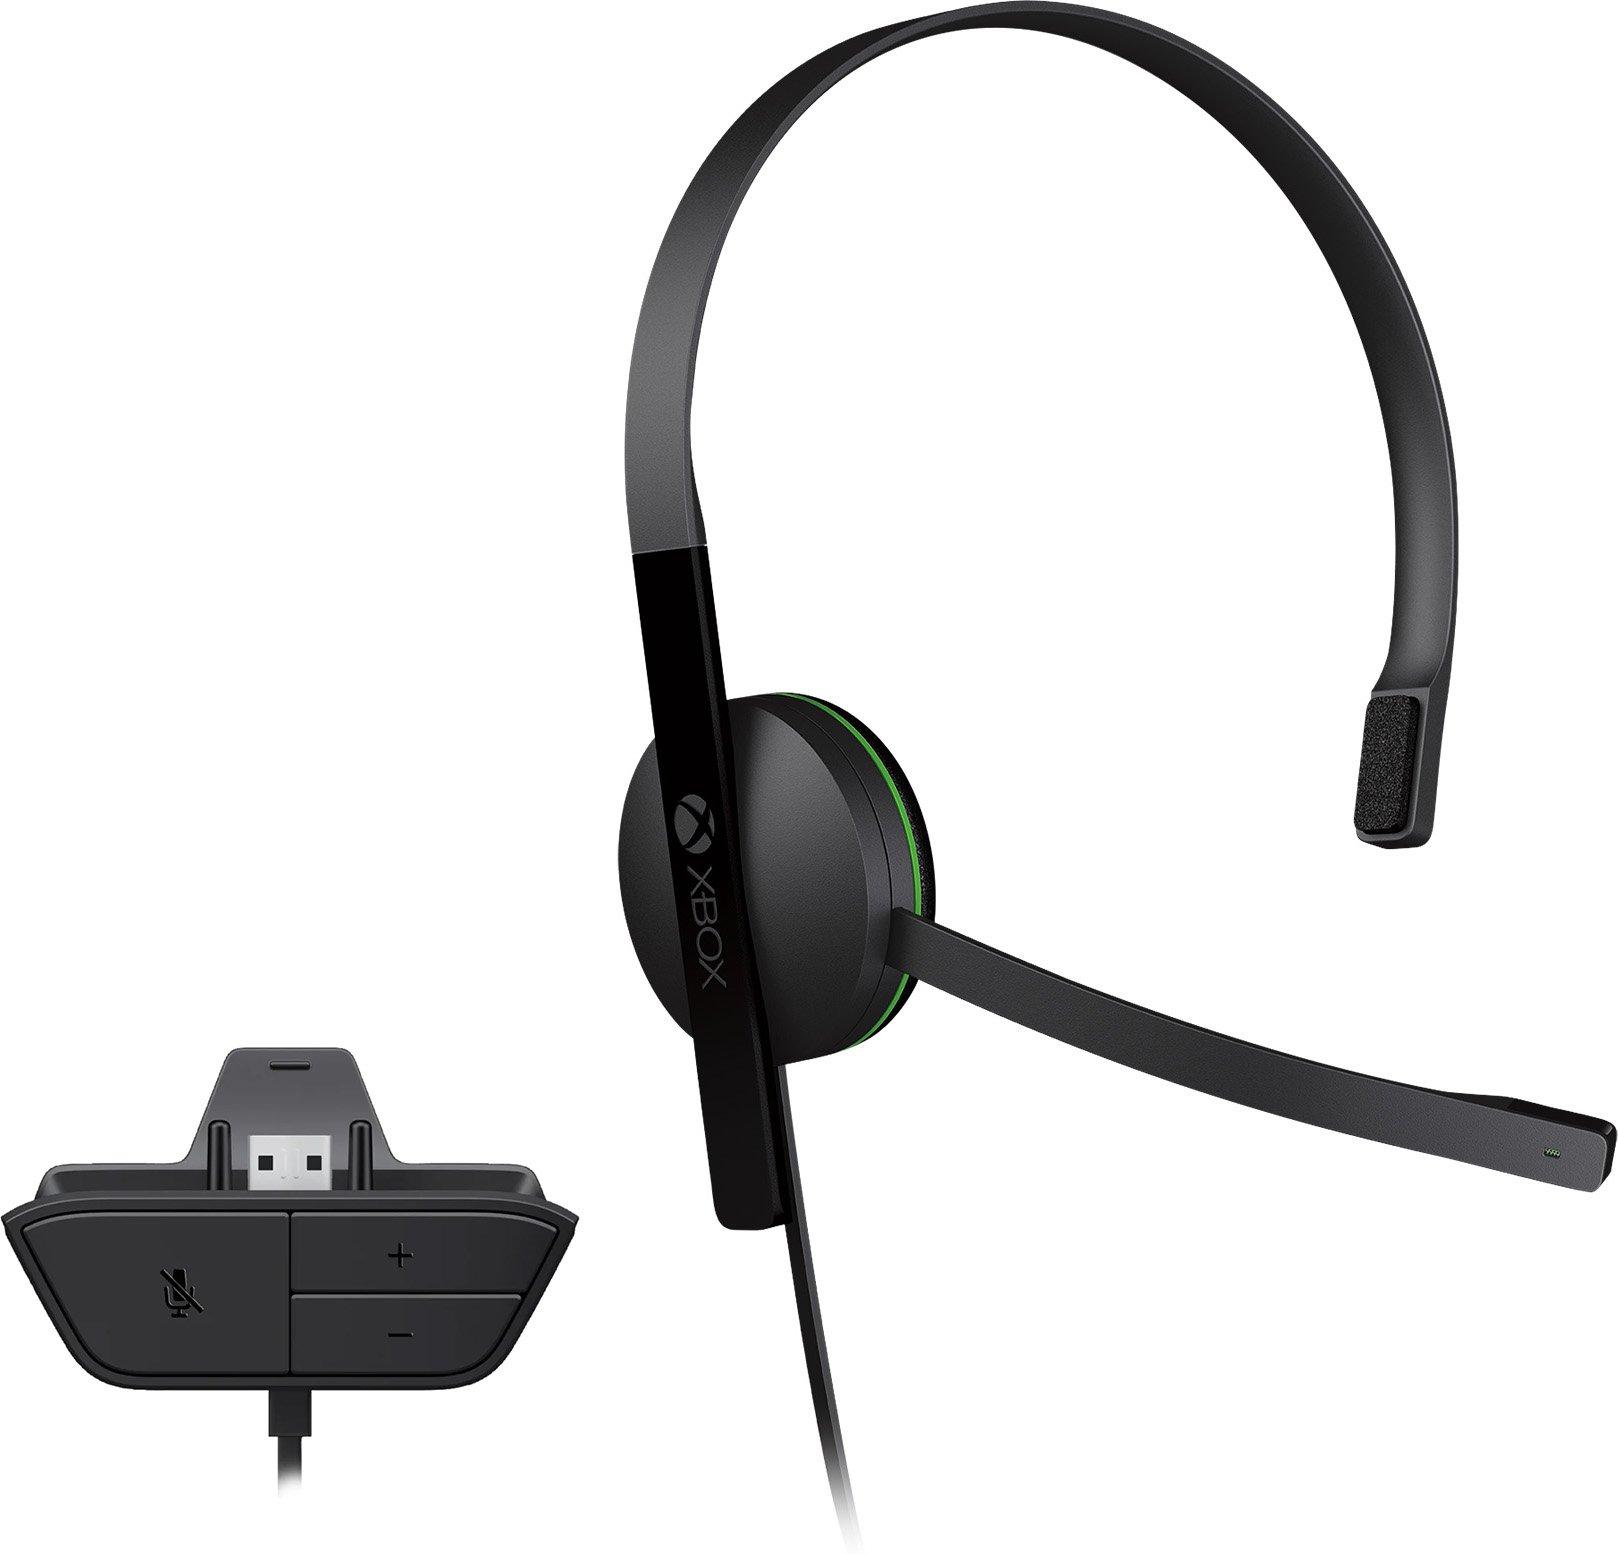 Microsoft Wired Headset for Xbox One (Styles May Vary)